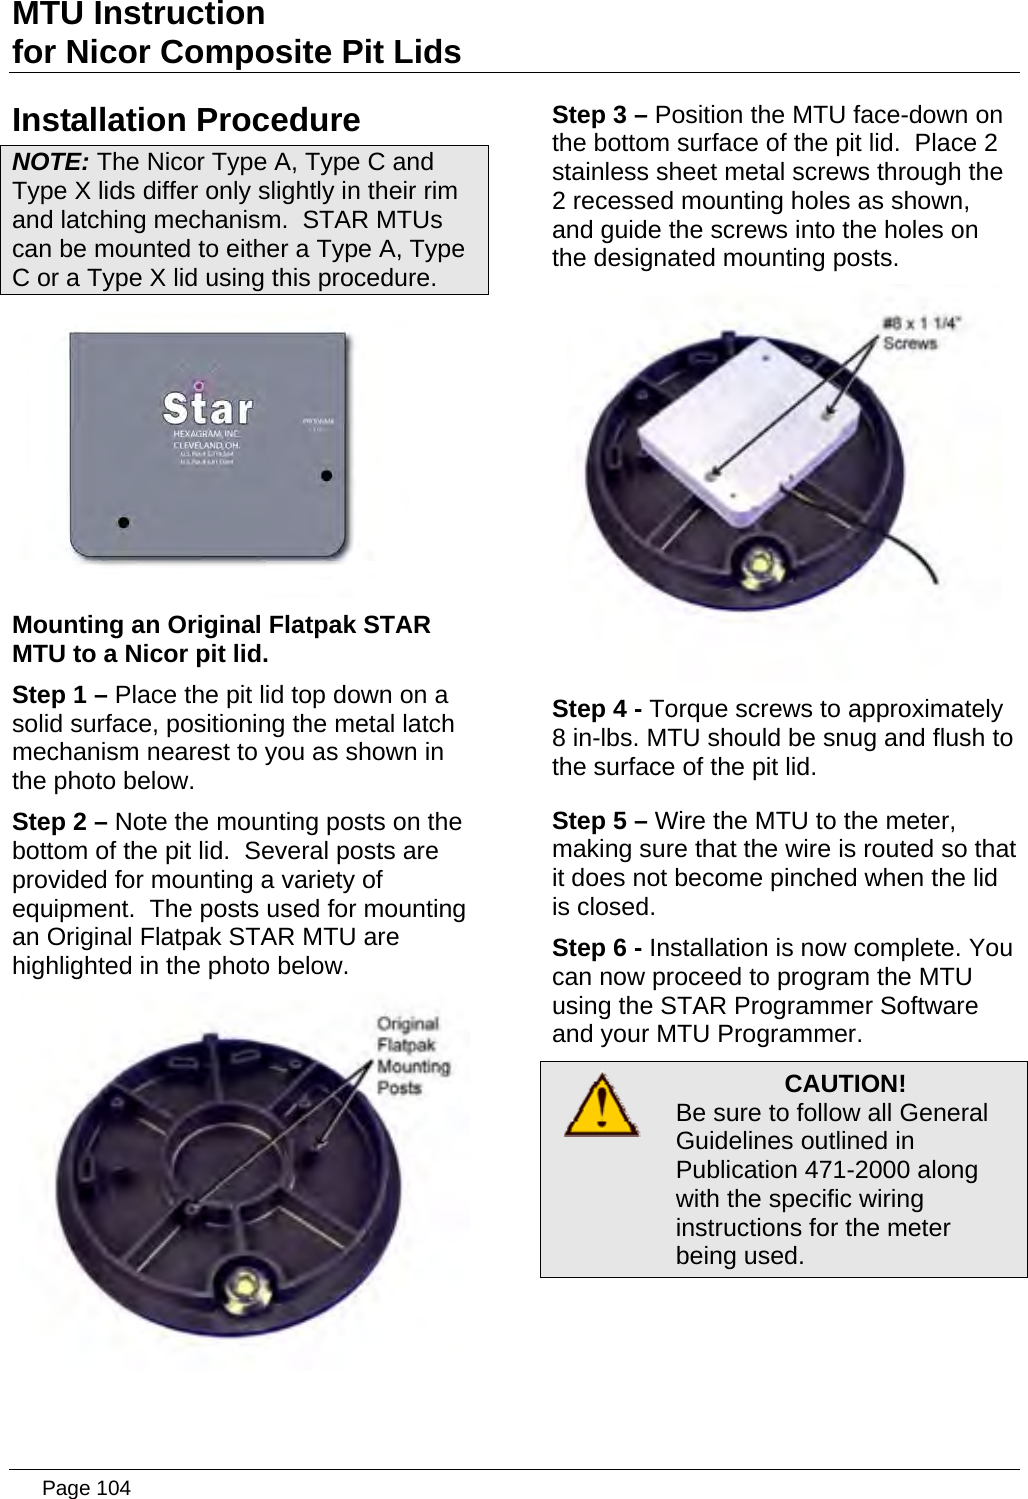 MTU Instruction for Nicor Composite Pit Lids Installation Procedure NOTE: The Nicor Type A, Type C and Type X lids differ only slightly in their rim and latching mechanism.  STAR MTUs can be mounted to either a Type A, Type C or a Type X lid using this procedure.  Mounting an Original Flatpak STAR MTU to a Nicor pit lid. Step 1 – Place the pit lid top down on a solid surface, positioning the metal latch mechanism nearest to you as shown in the photo below. Step 2 – Note the mounting posts on the bottom of the pit lid.  Several posts are provided for mounting a variety of equipment.  The posts used for mounting an Original Flatpak STAR MTU are highlighted in the photo below.  Step 3 – Position the MTU face-down on the bottom surface of the pit lid.  Place 2 stainless sheet metal screws through the 2 recessed mounting holes as shown, and guide the screws into the holes on the designated mounting posts.  Step 4 - Torque screws to approximately 8 in-lbs. MTU should be snug and flush to the surface of the pit lid. Step 5 – Wire the MTU to the meter, making sure that the wire is routed so that it does not become pinched when the lid is closed. Step 6 - Installation is now complete. You can now proceed to program the MTU using the STAR Programmer Software and your MTU Programmer.  CAUTION! Be sure to follow all General Guidelines outlined in Publication 471-2000 along with the specific wiring instructions for the meter being used.   Page 104